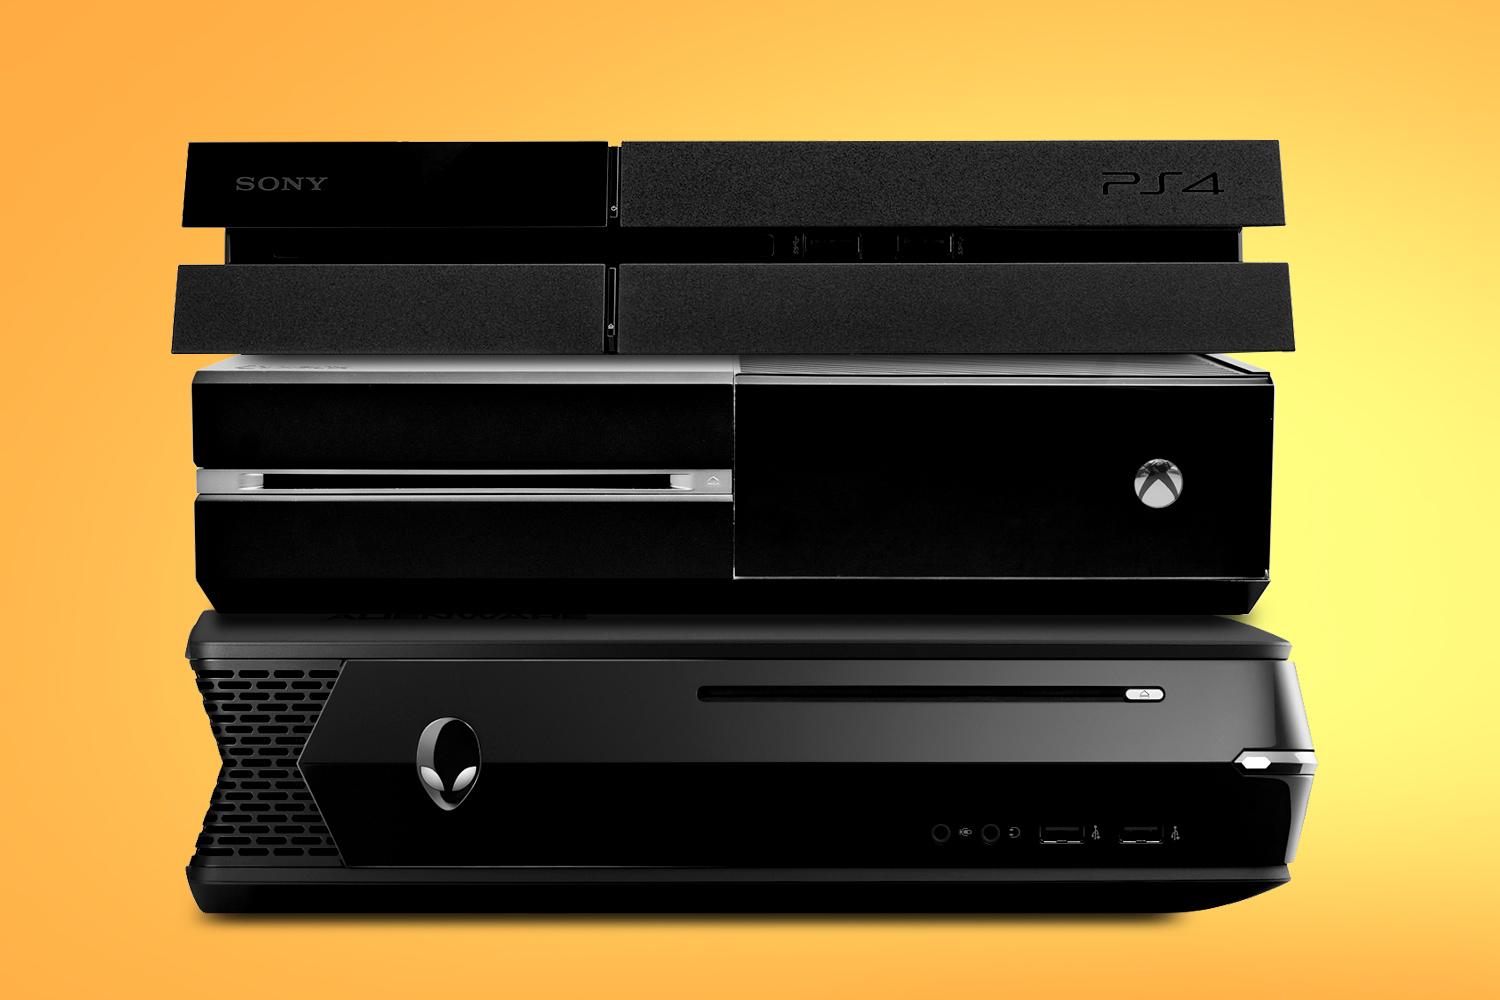 Microsoft's 'All-Digital' Xbox Won't Have a Disc Reader - Preorder